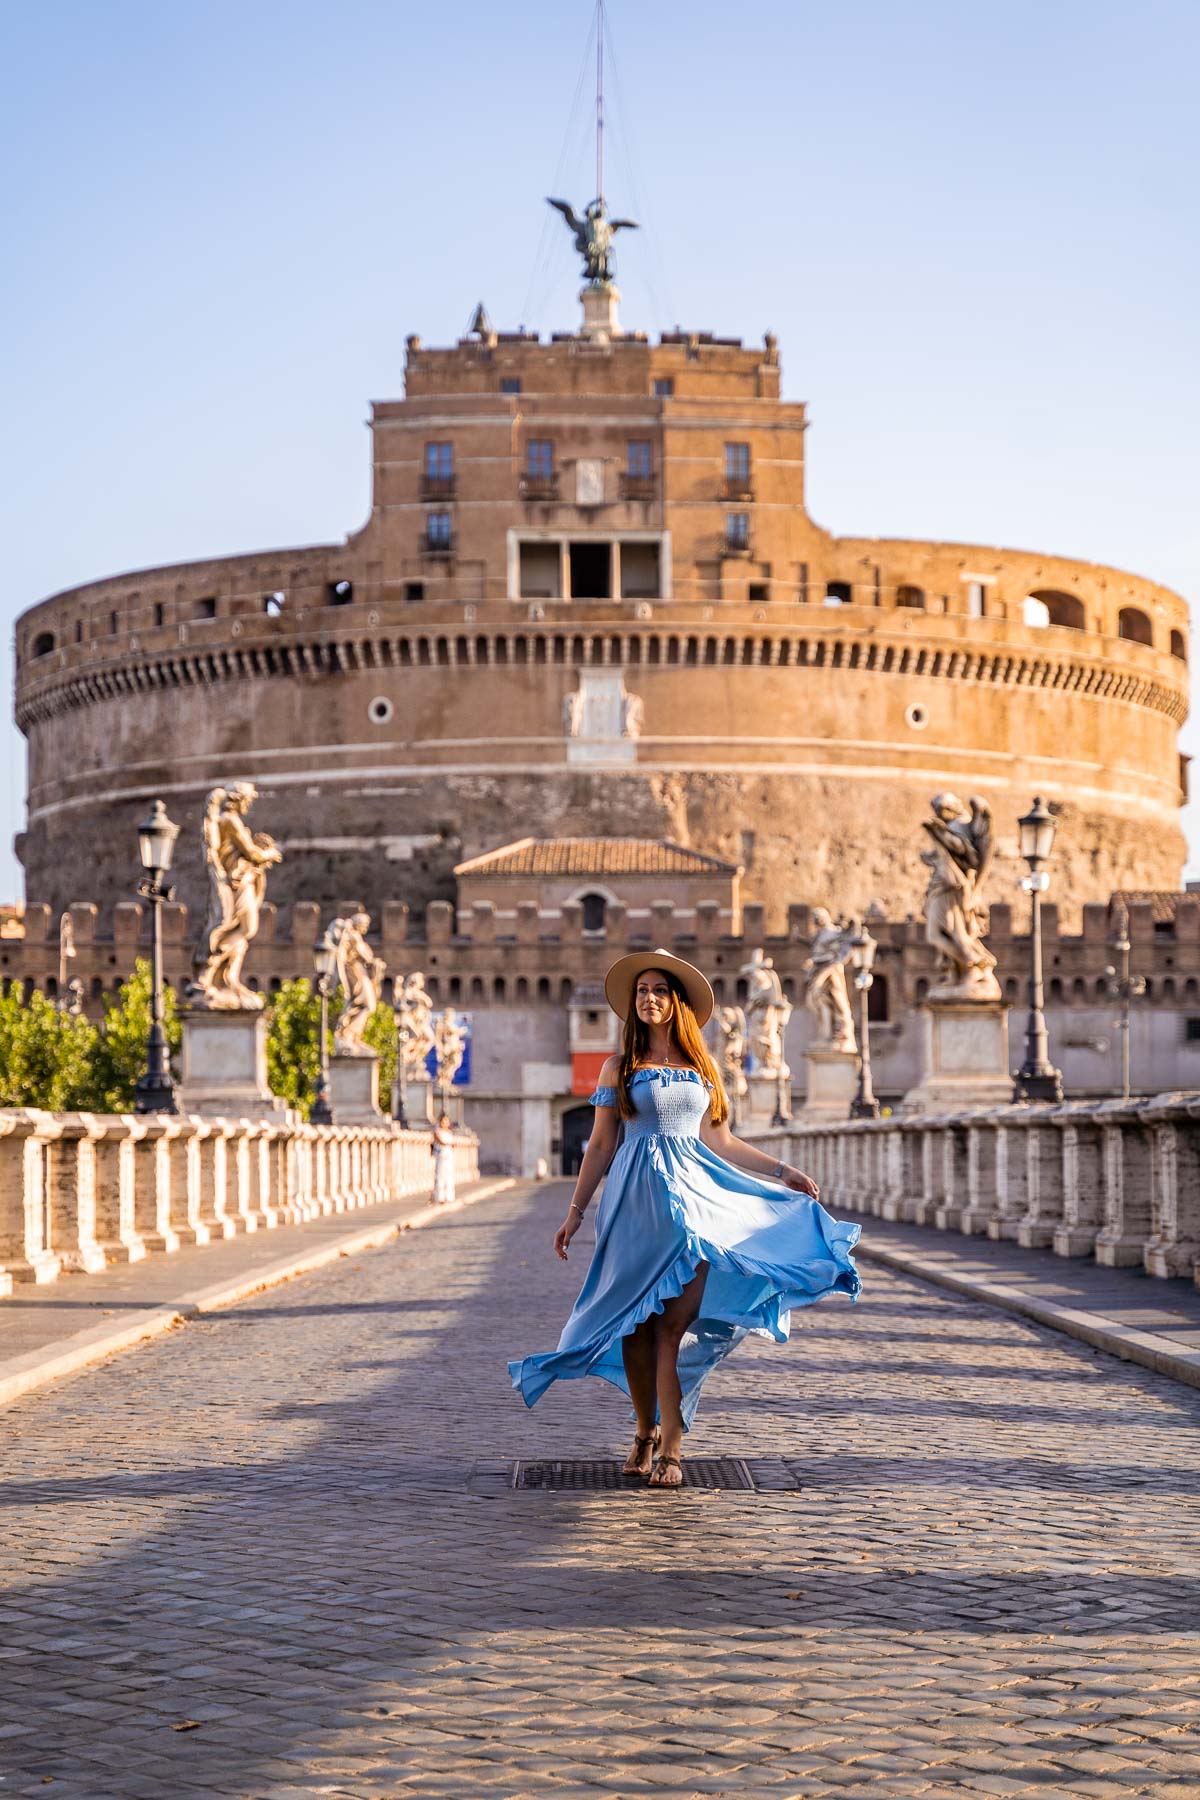 Castel Sant' Angelo with a girl in a blue dress